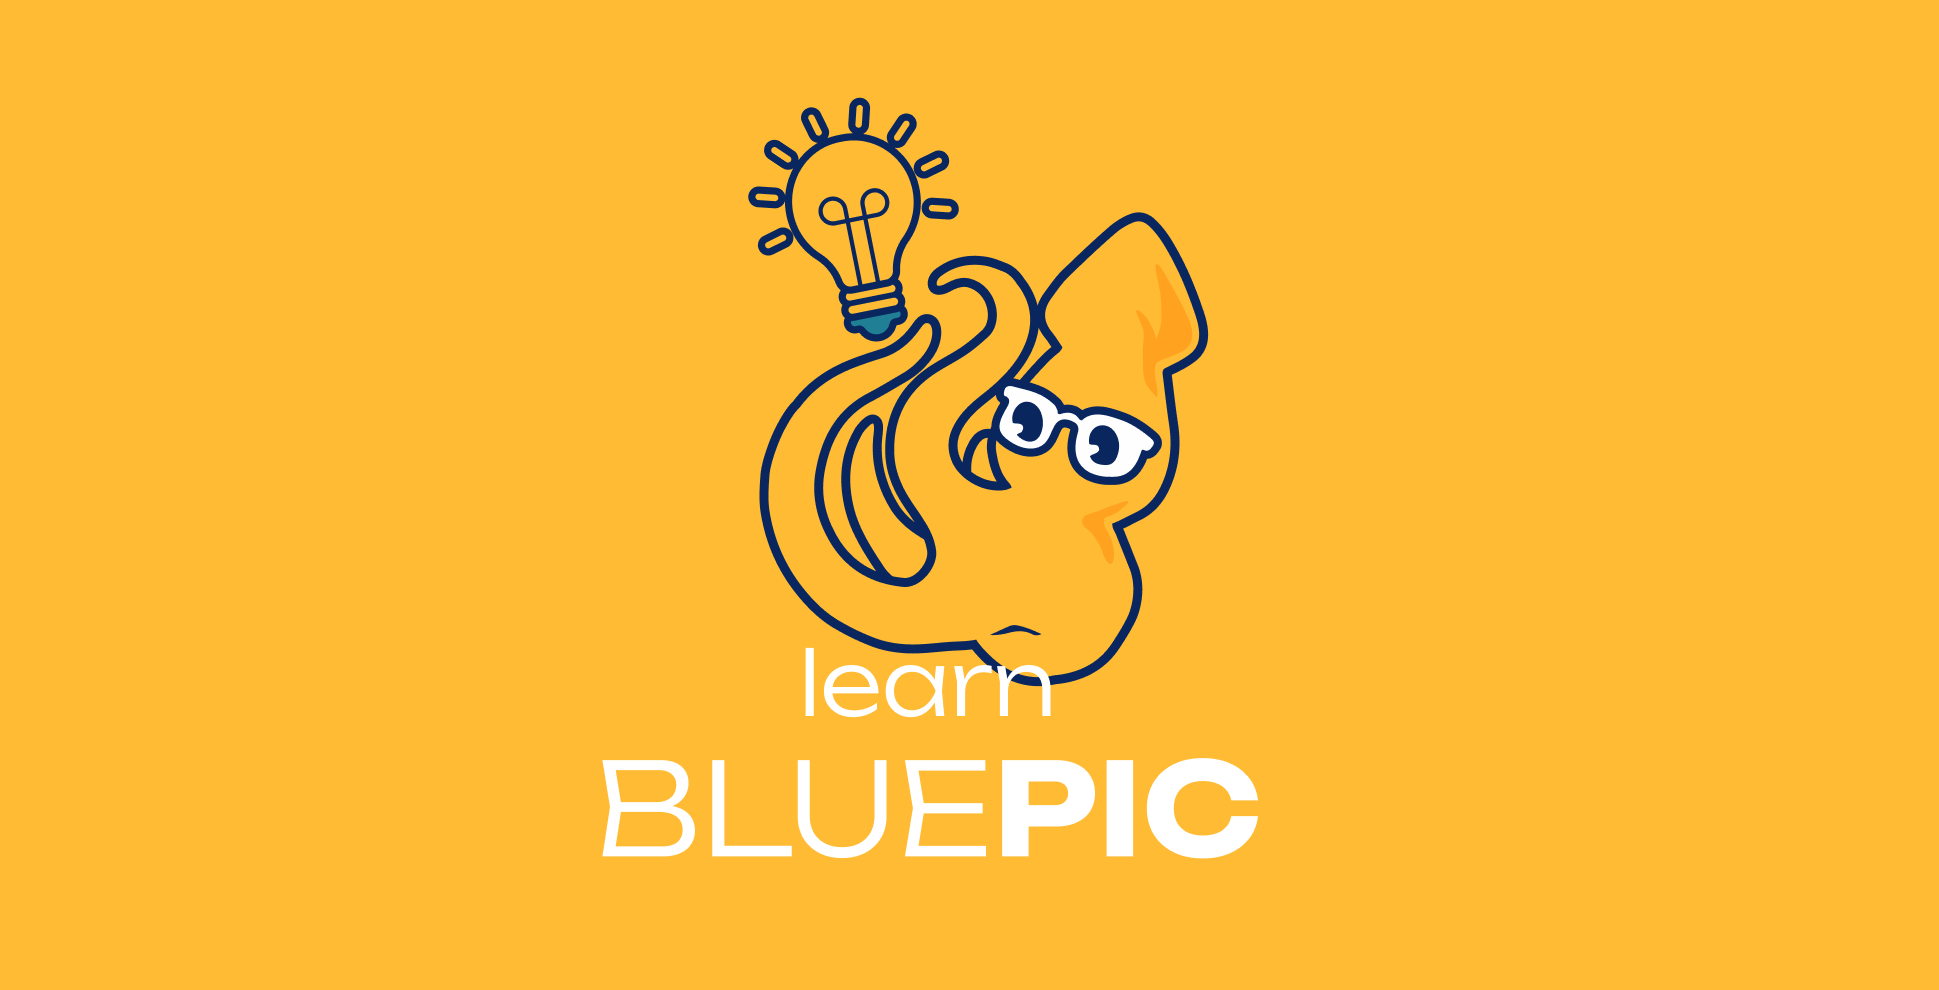 Getting Started with BLUEPIC Studio